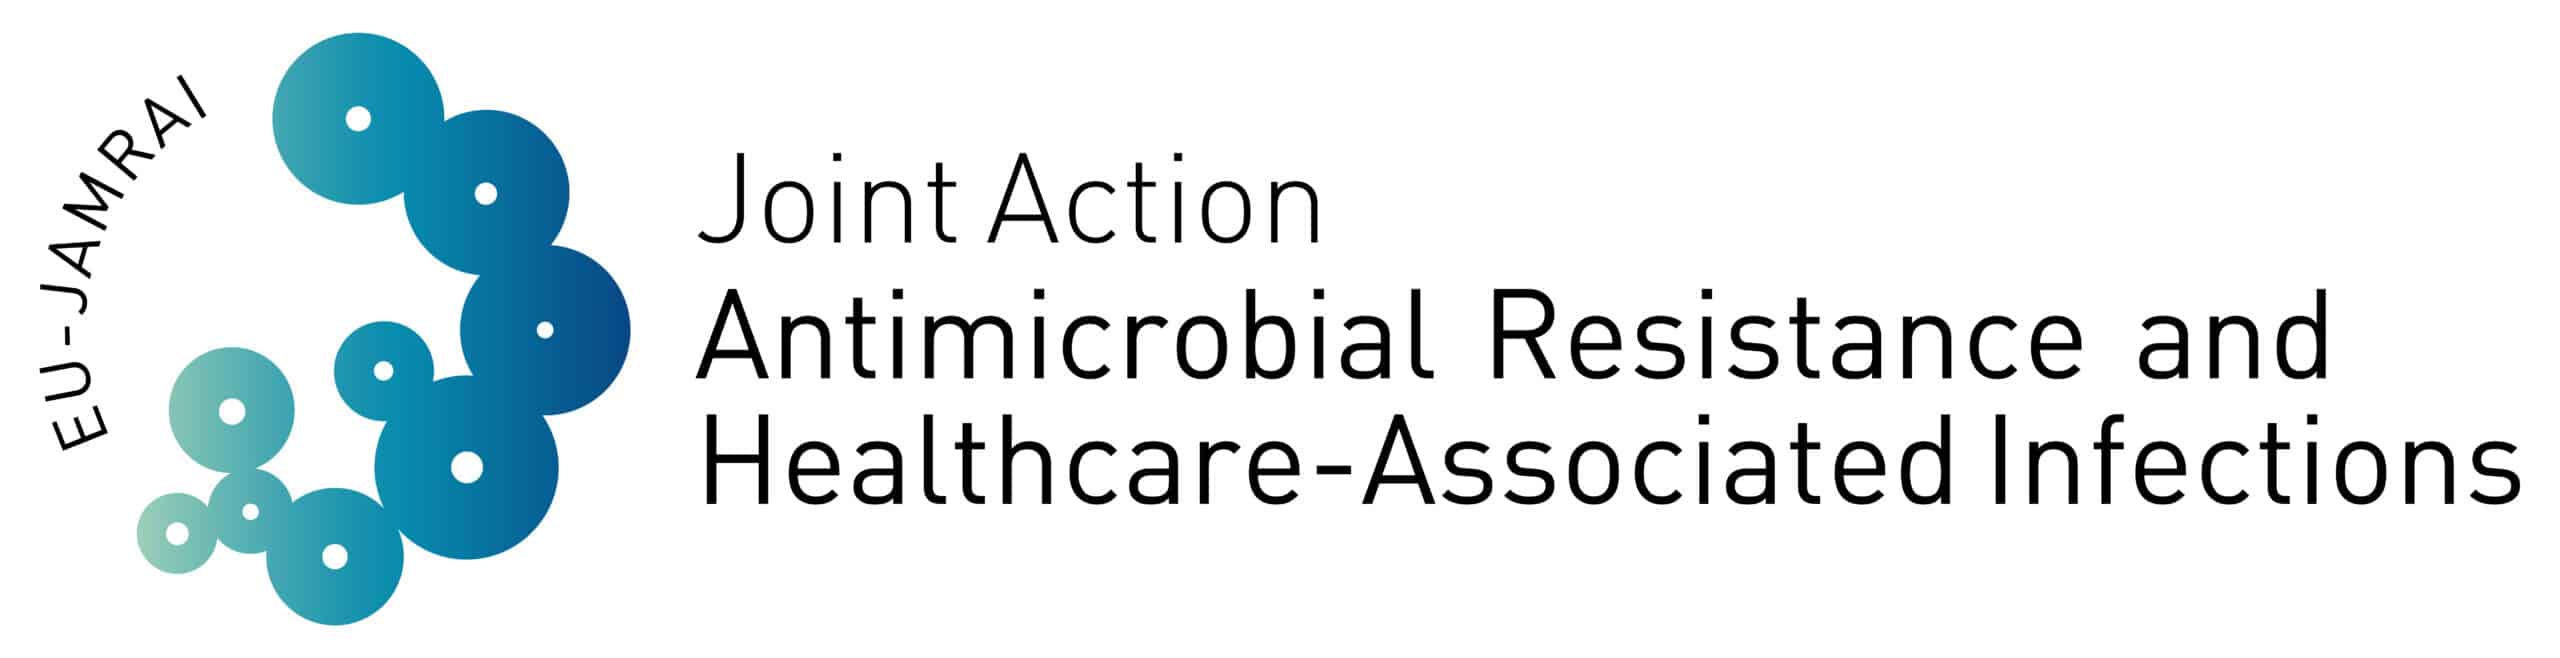 Logotipo JAMRAI2 Joint Action Antimicrobial Resistance and Healthcare-Associated Infections